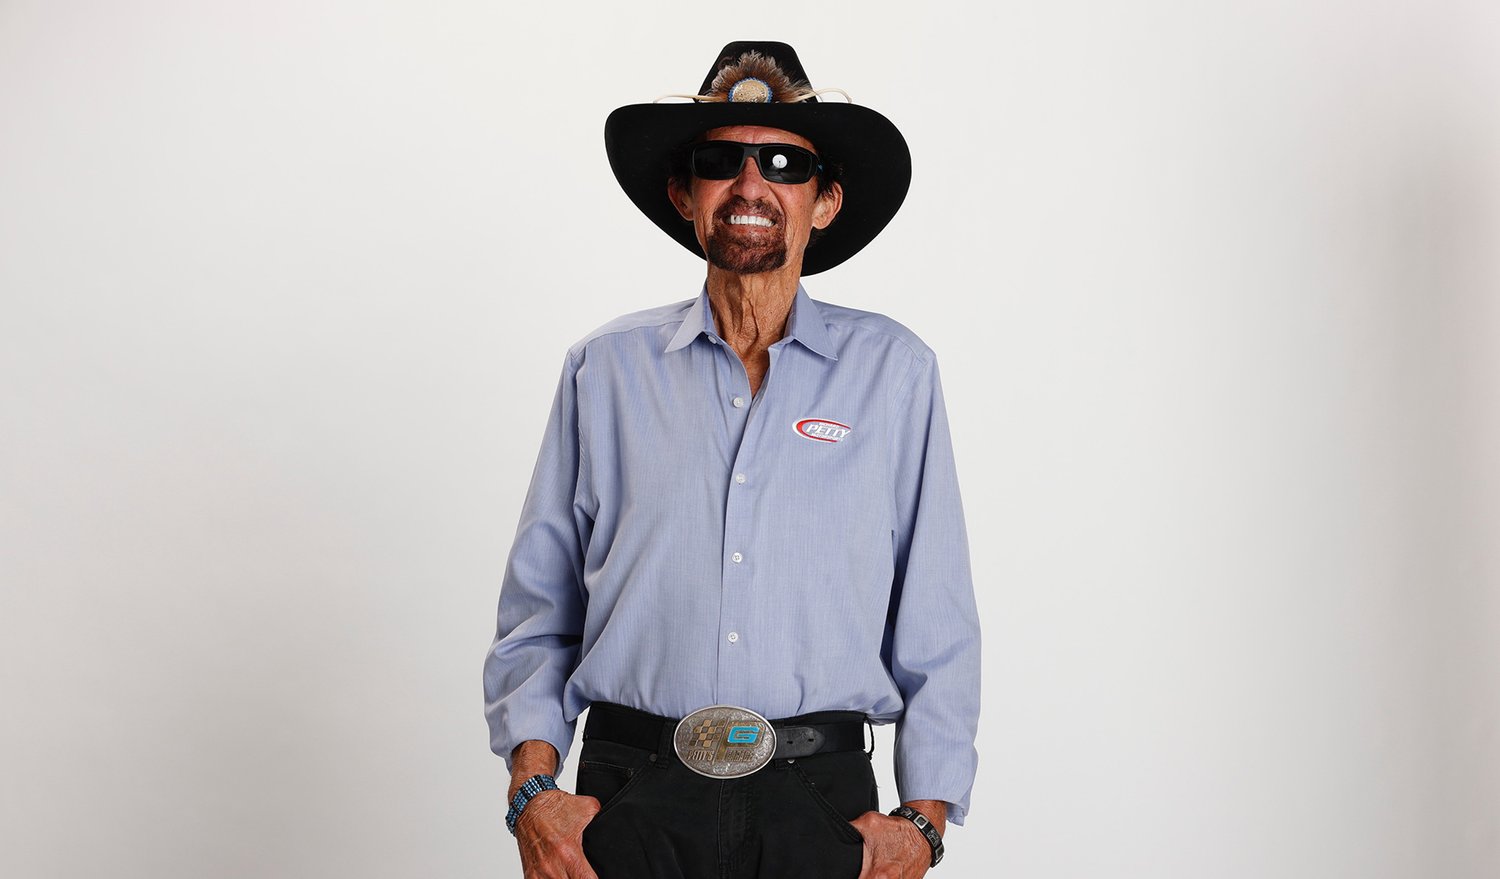 Richard Petty smiling and wearing cowboy hat and sunglasses